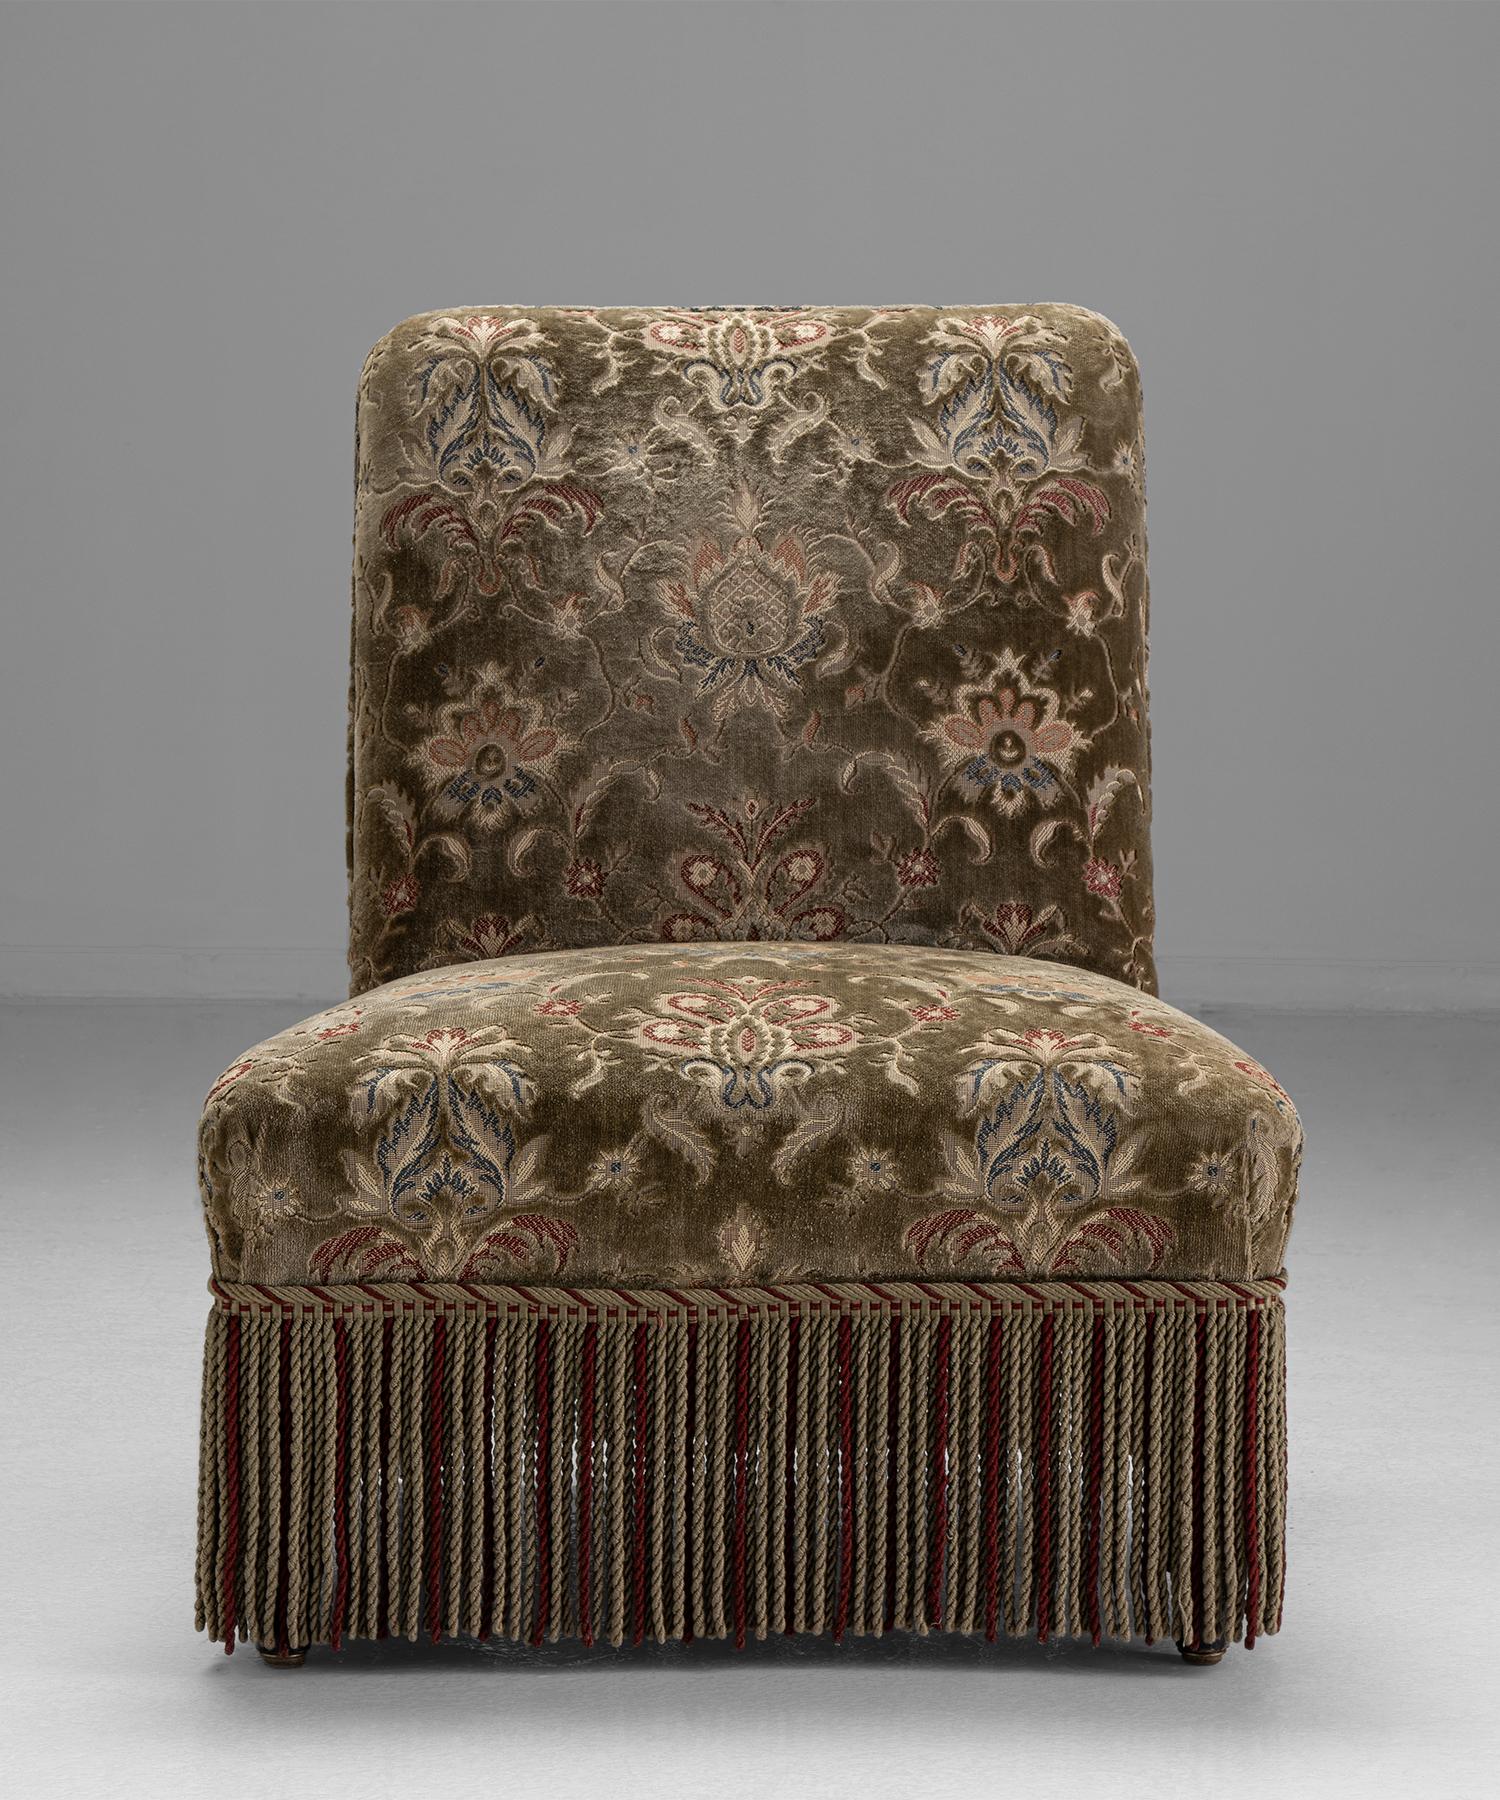 Pair of Napoleon III slipper chairs 

France Circa 1860

Original velvet upholstery and fringe, on ebonised legs.

Measures: 24.5”W x 27.5”D x 31”H x 14.75” seat.